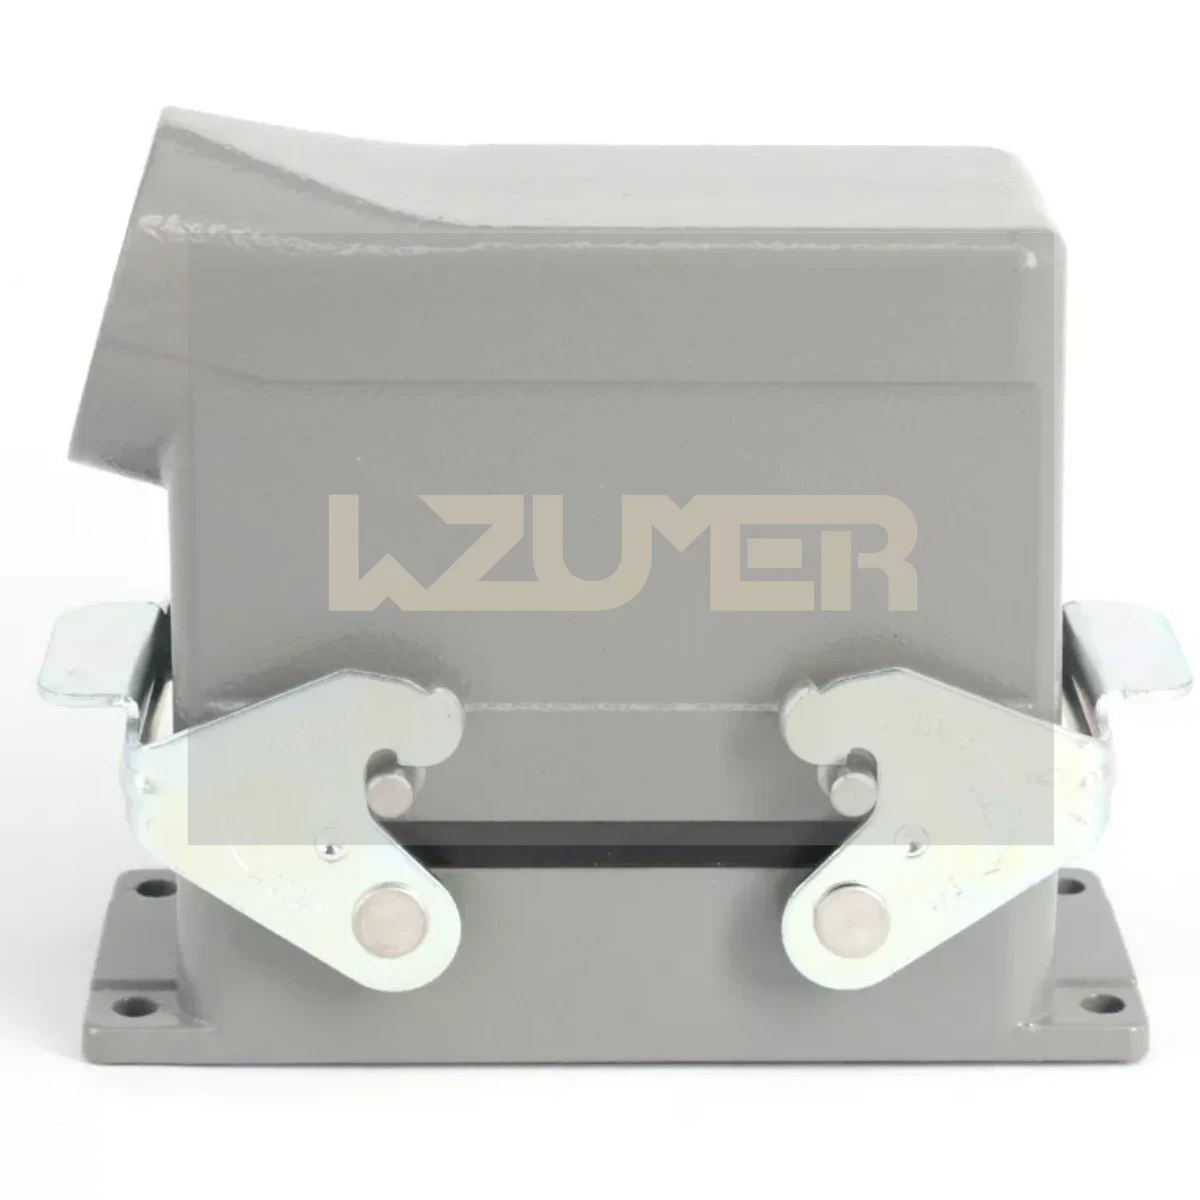 WZUMER Male Female HE Series 16 Pins Plugs Electrical Heavy Duty Connectors